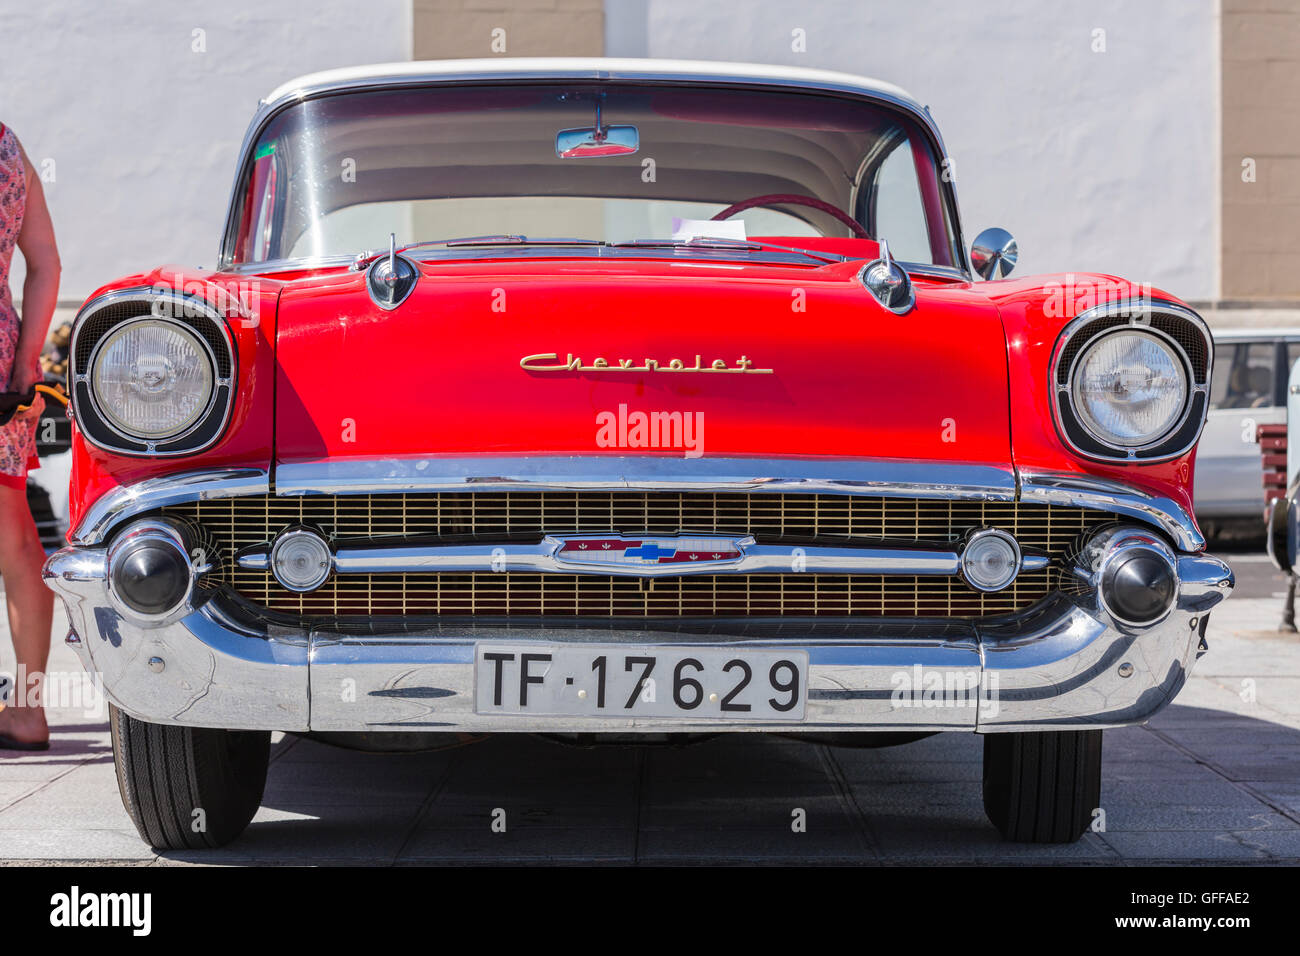 Front view of a red Chevrolet Belair car Stock Photo